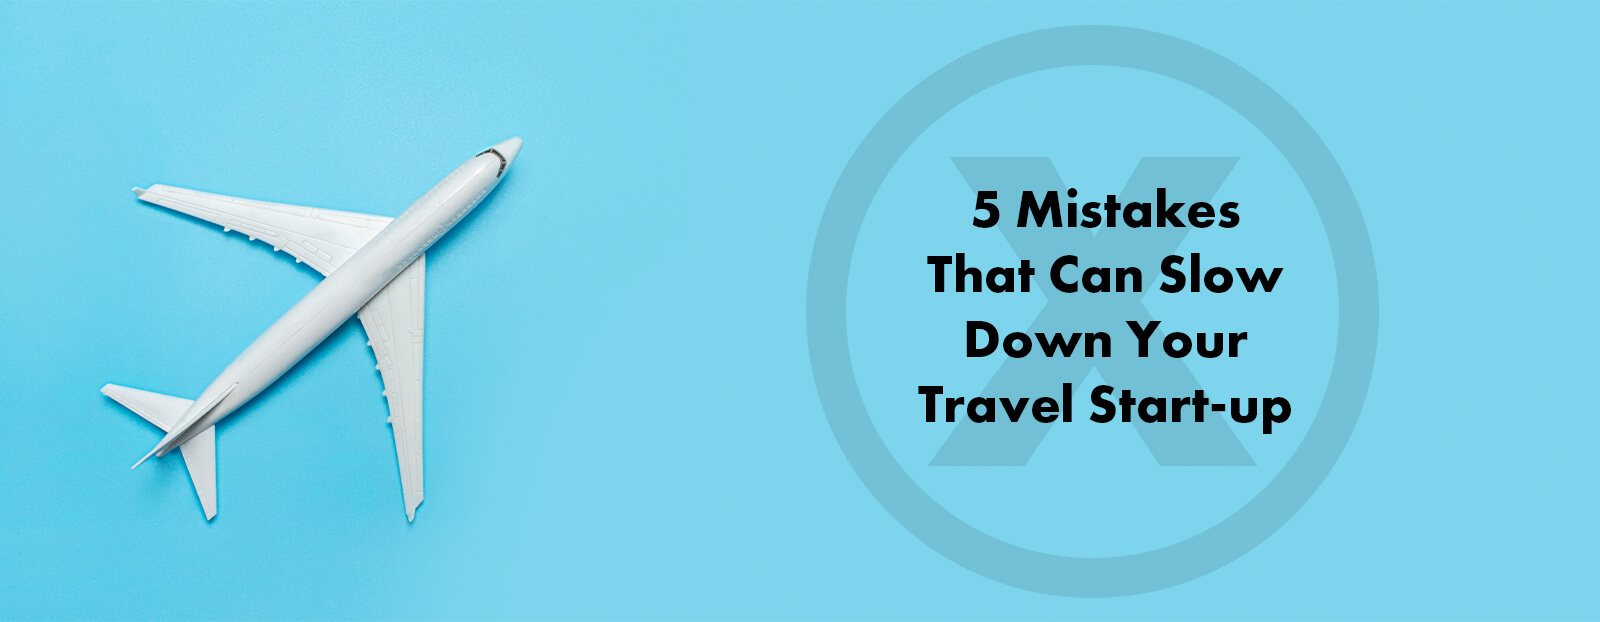 5 Mistakes That Can Slow Down Your Travel Start-up